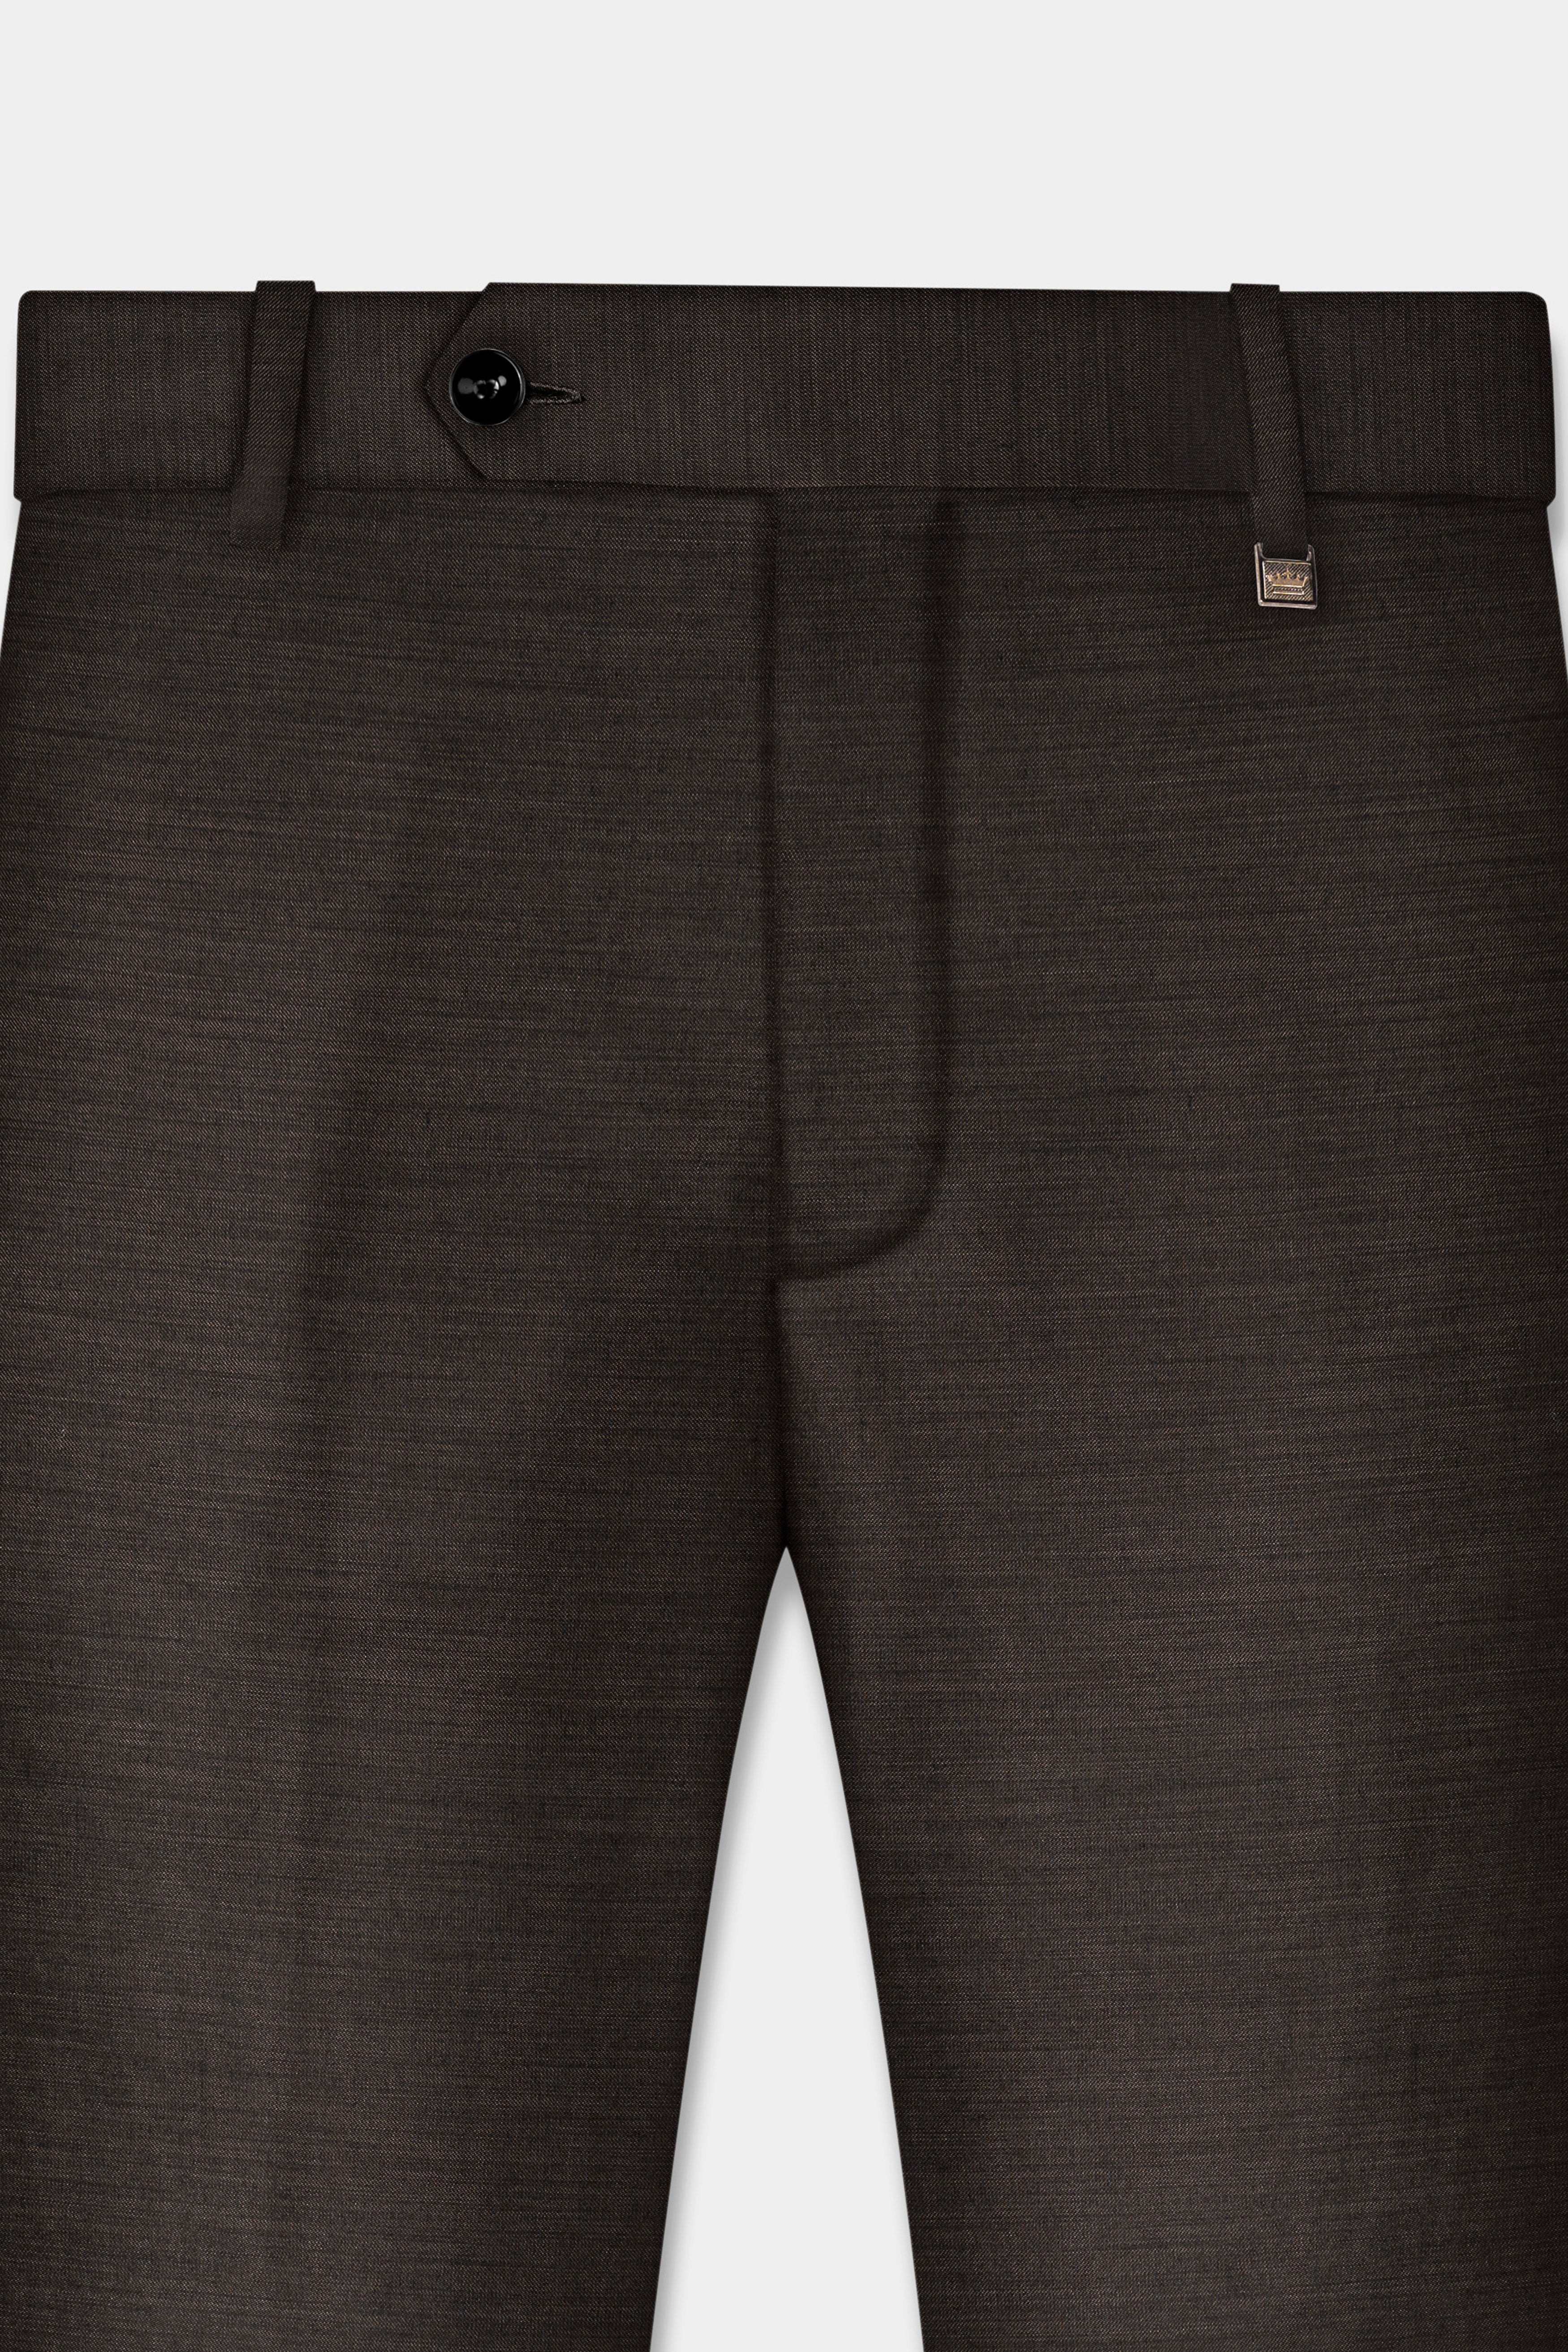 Eclipse Brown Textured Wool Blend Pant